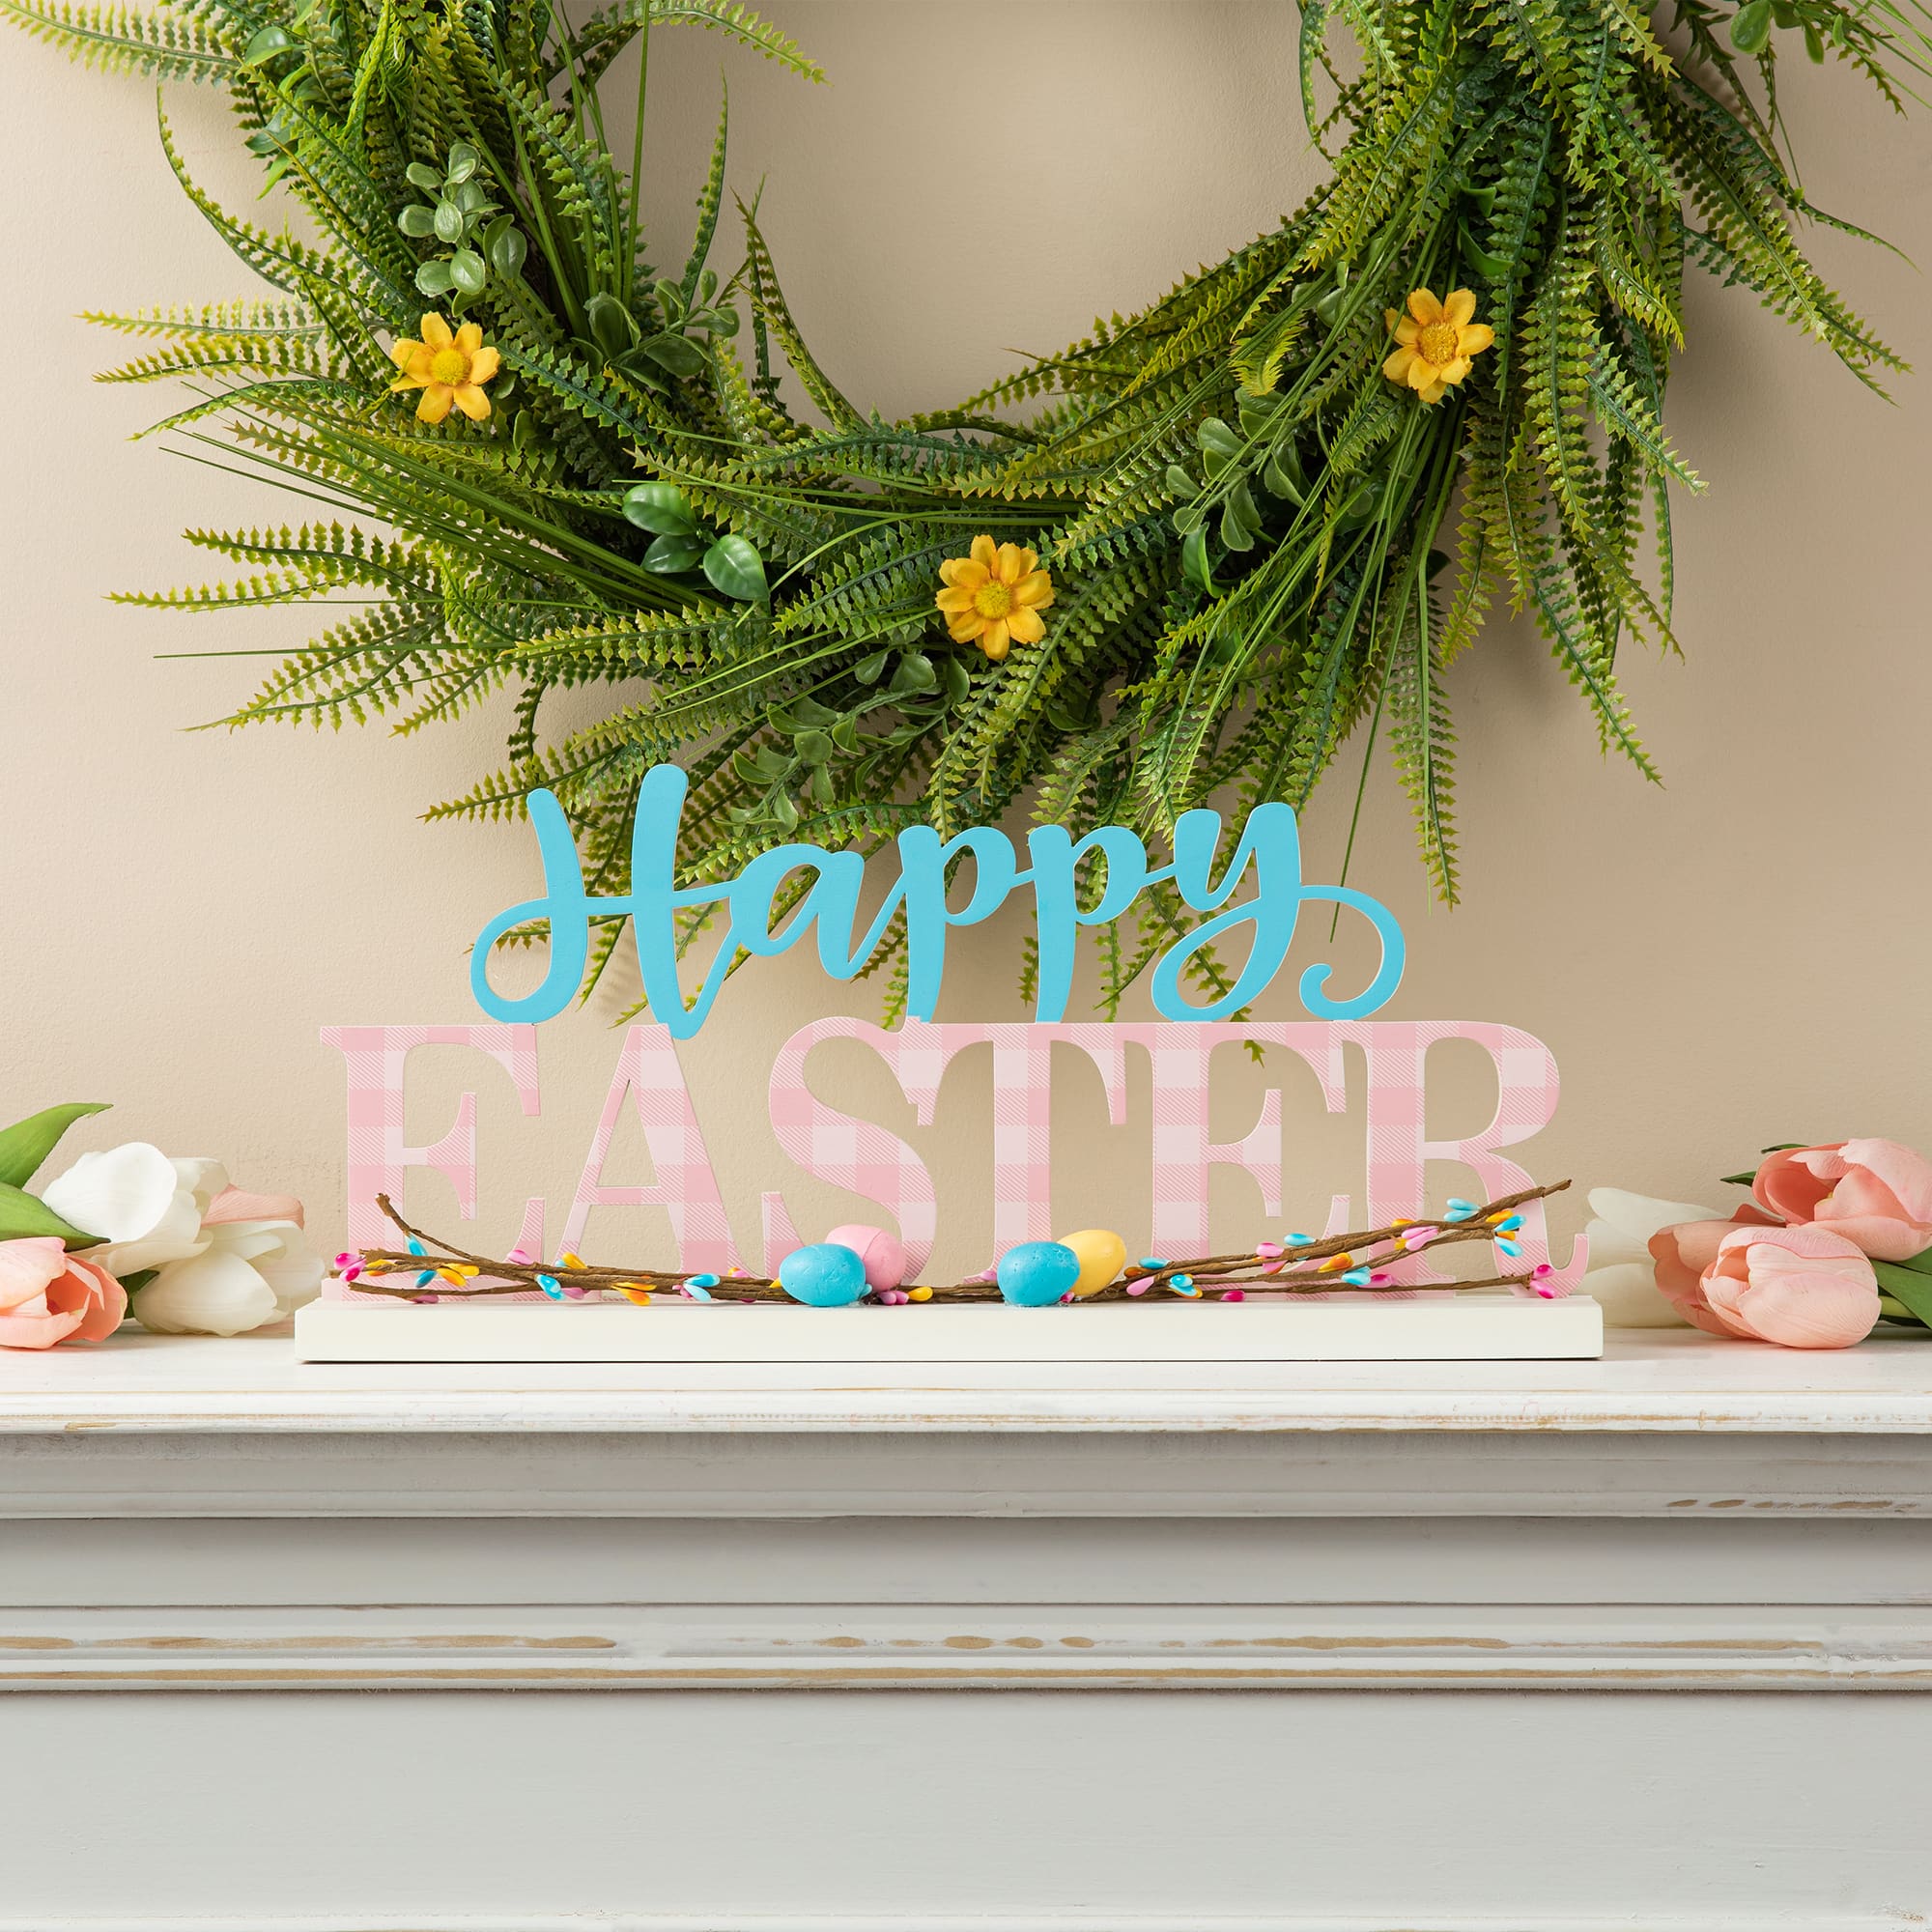 Glitzhome&#xAE; 15.75&#x22; Easter Wooden &#x22;Happy Easter&#x22; Table D&#xE9;cor